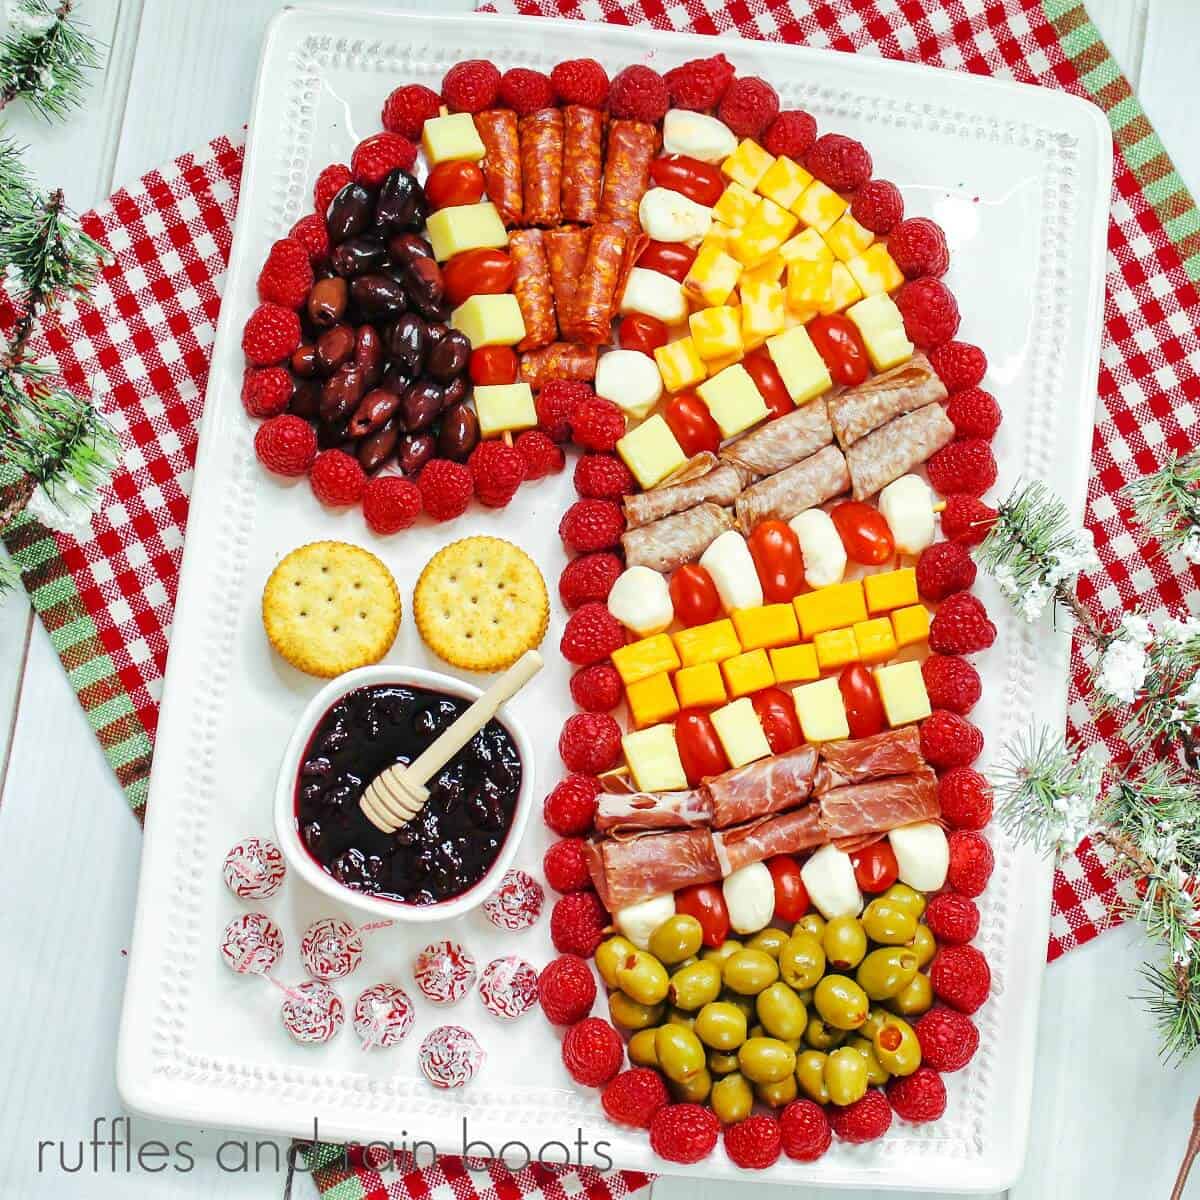 A square image of the meat, cheese, olives and fruit charcuterie board in the shape of a candy cane, on a white plate against a red and white gingham towel on a weathered white wood backdrop, next to faux winter greenery.